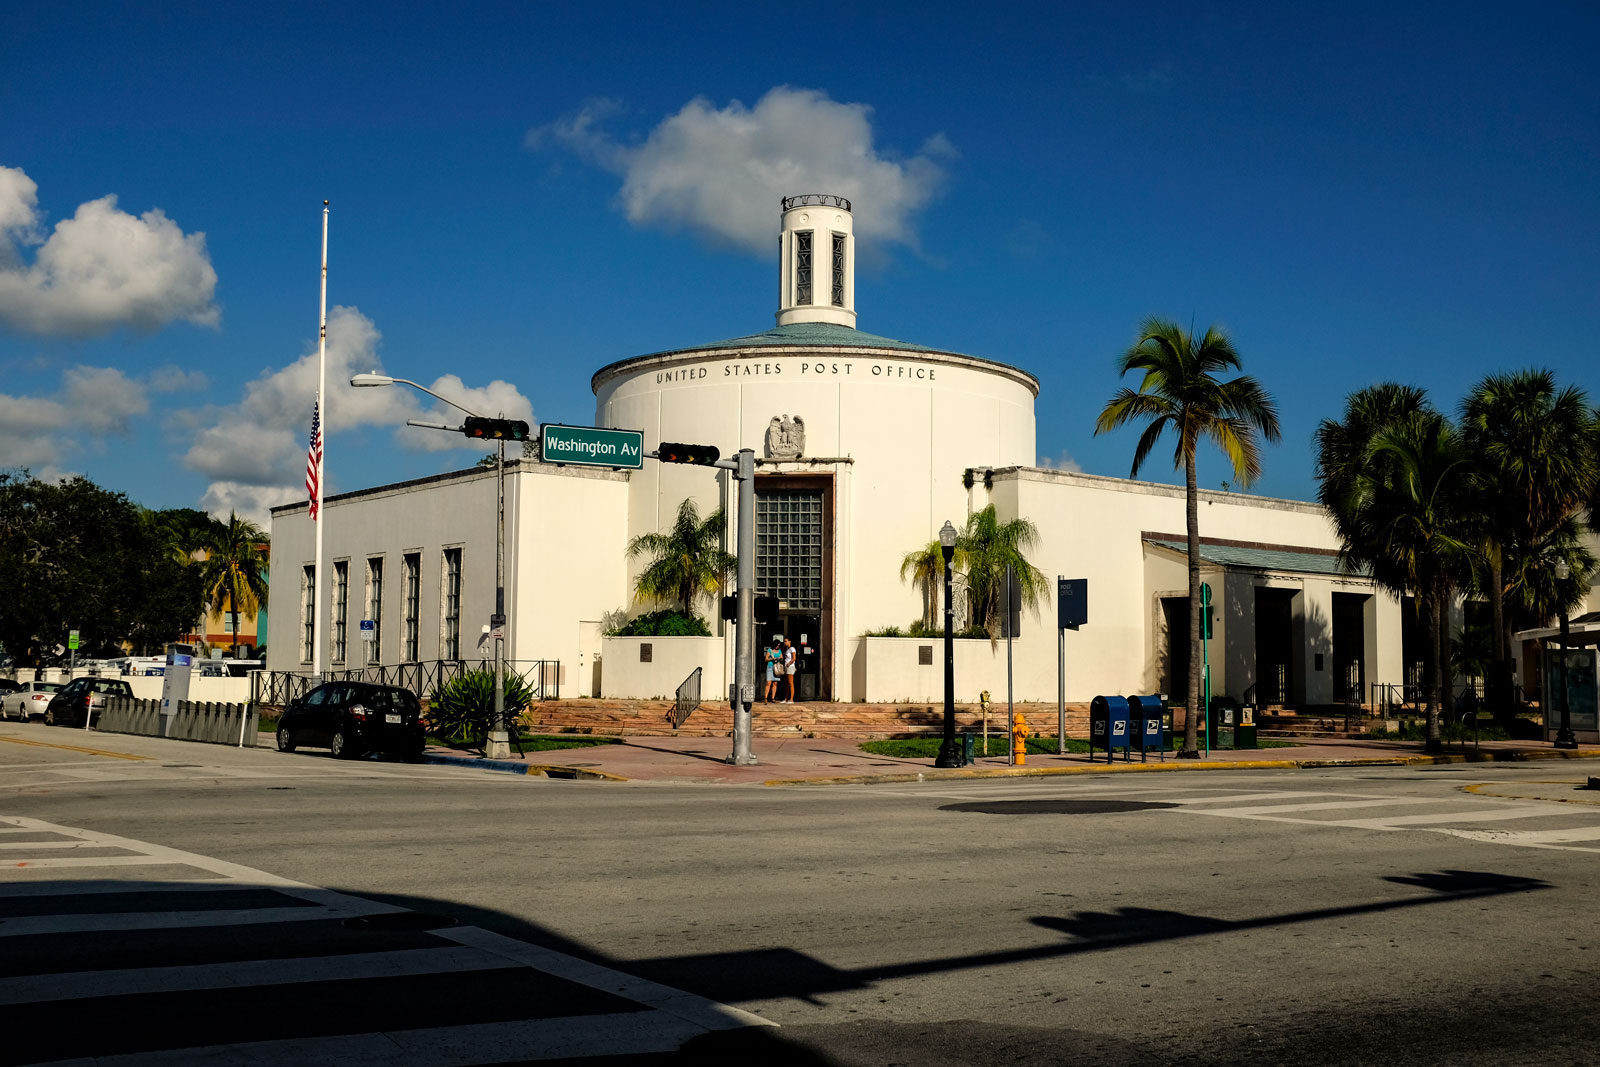 The architecture of the Miami Beach Post Office